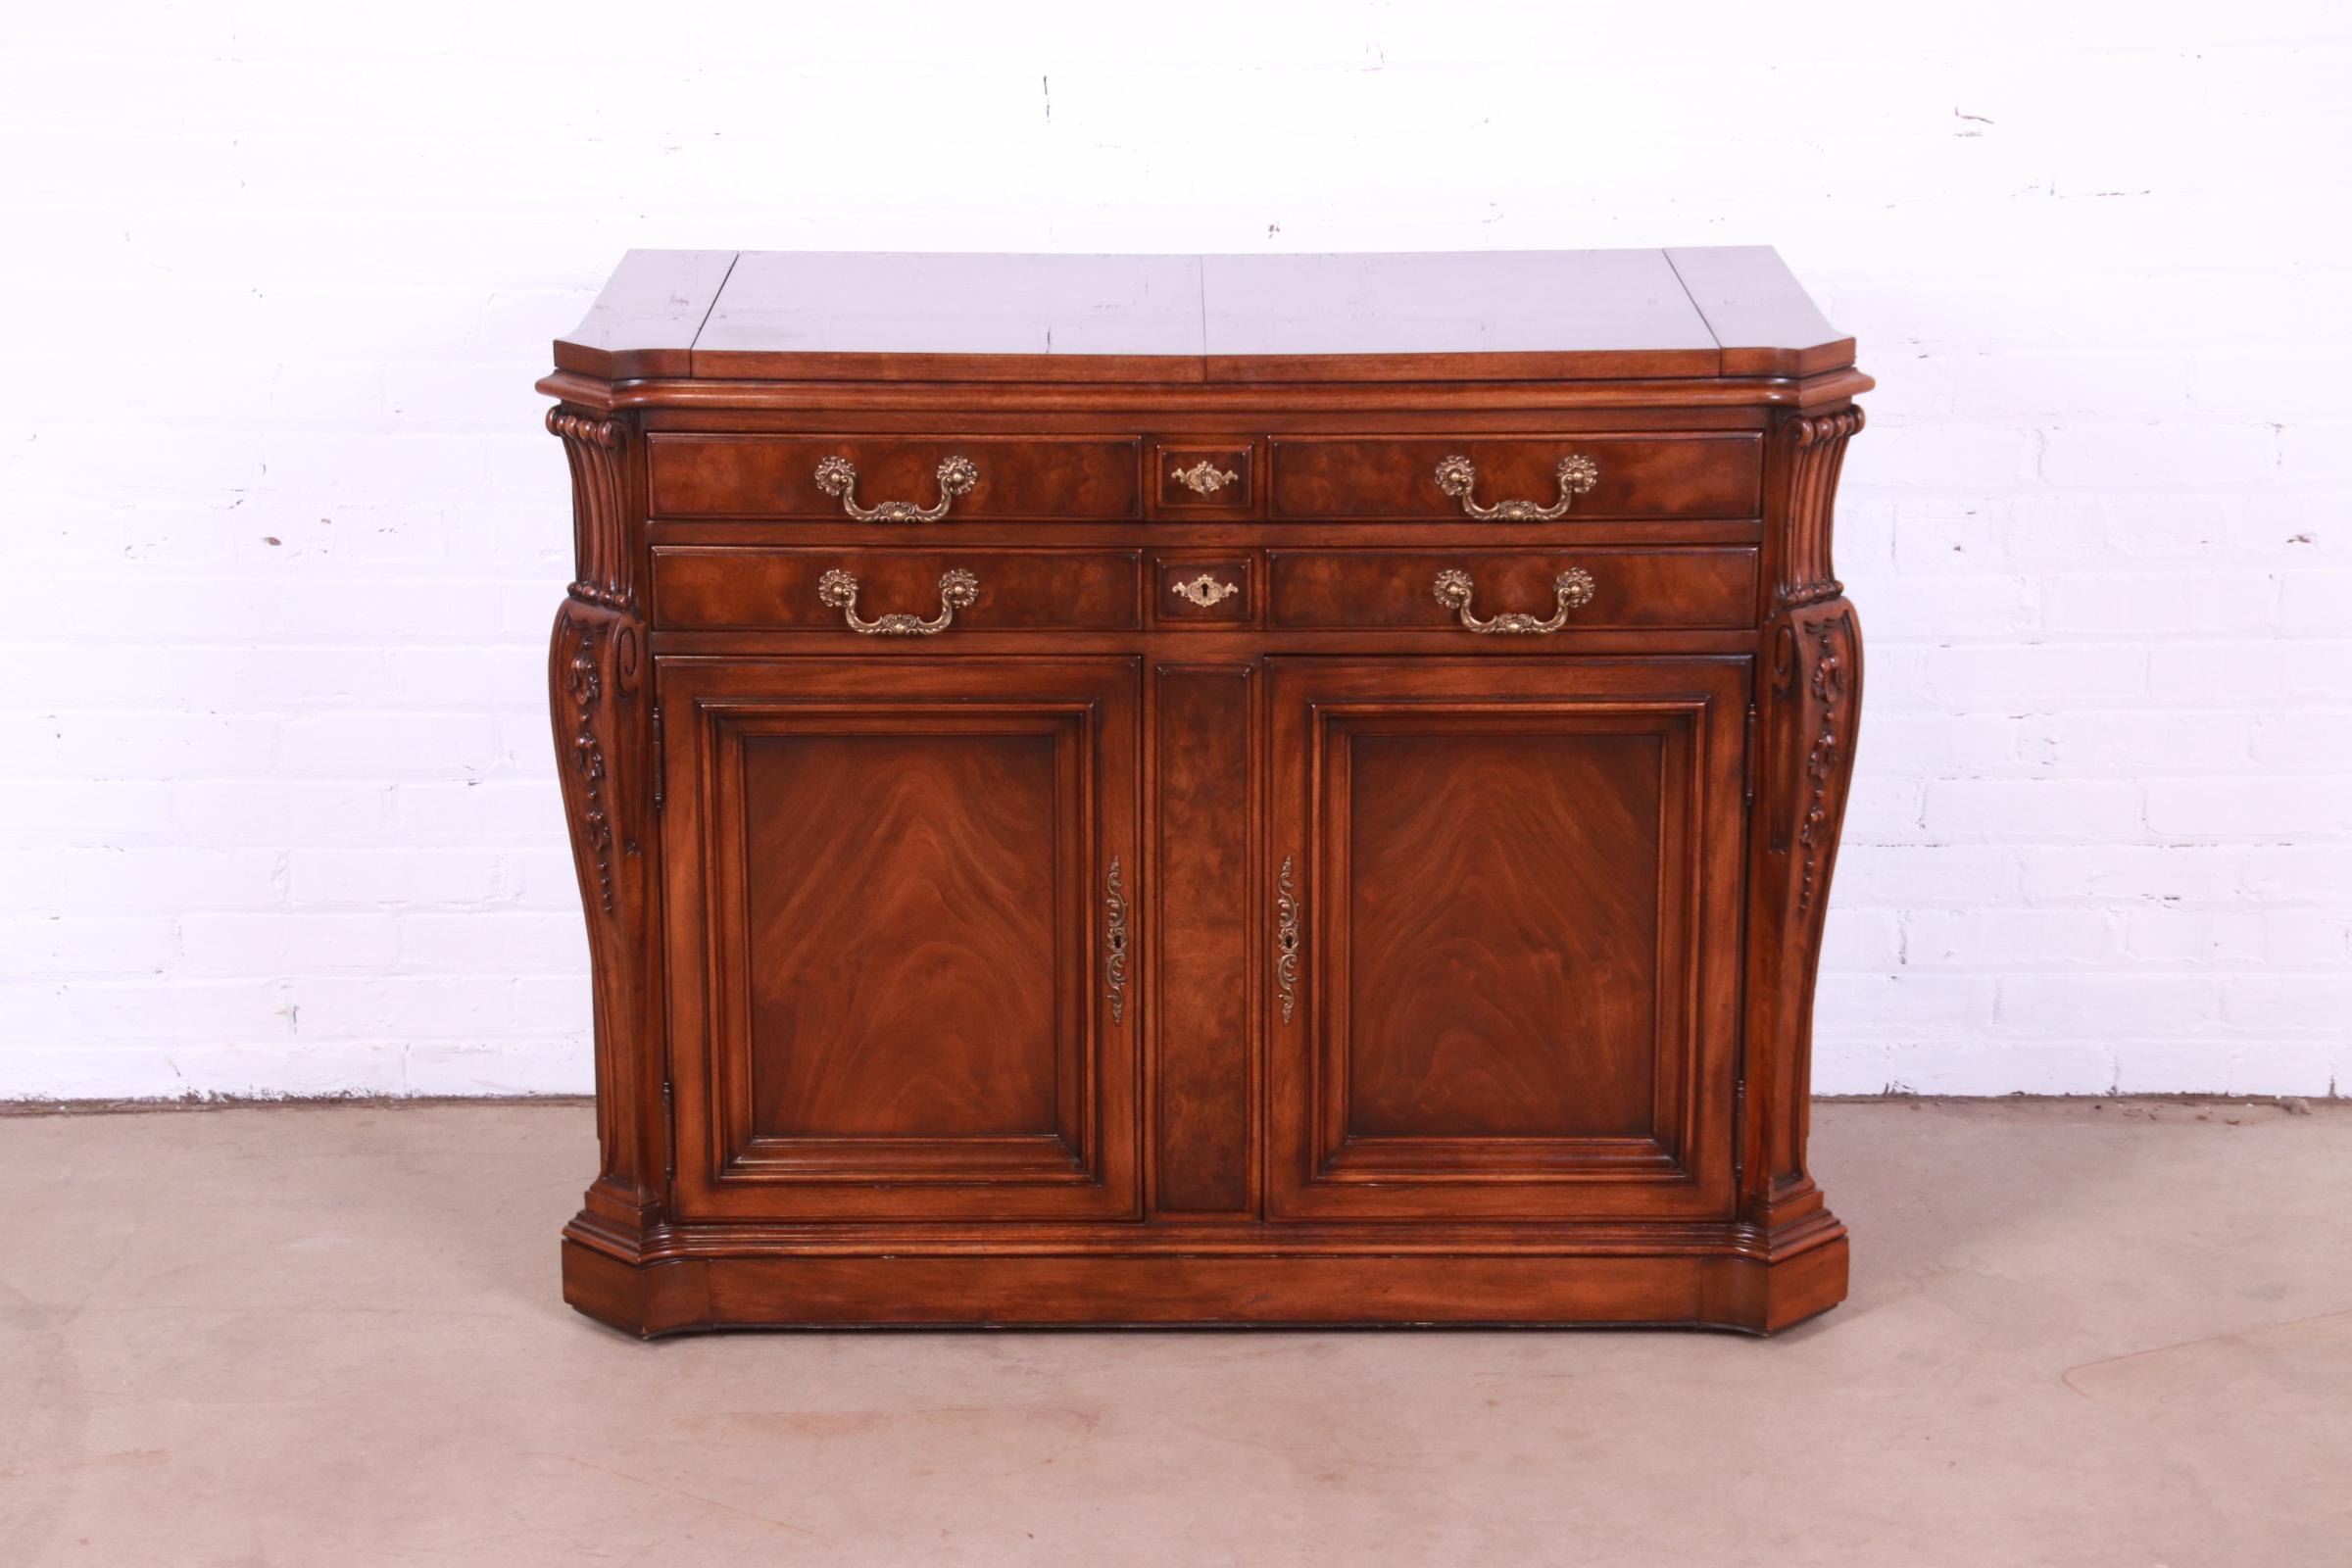 An exceptional French Louis XV style flip top rolling server or bar cart

By Karges

USA, Circa 1980s

Gorgeous figural burled walnut, with original brass hardware and felt silverware inserts in drawers. Drawers lock, and key is